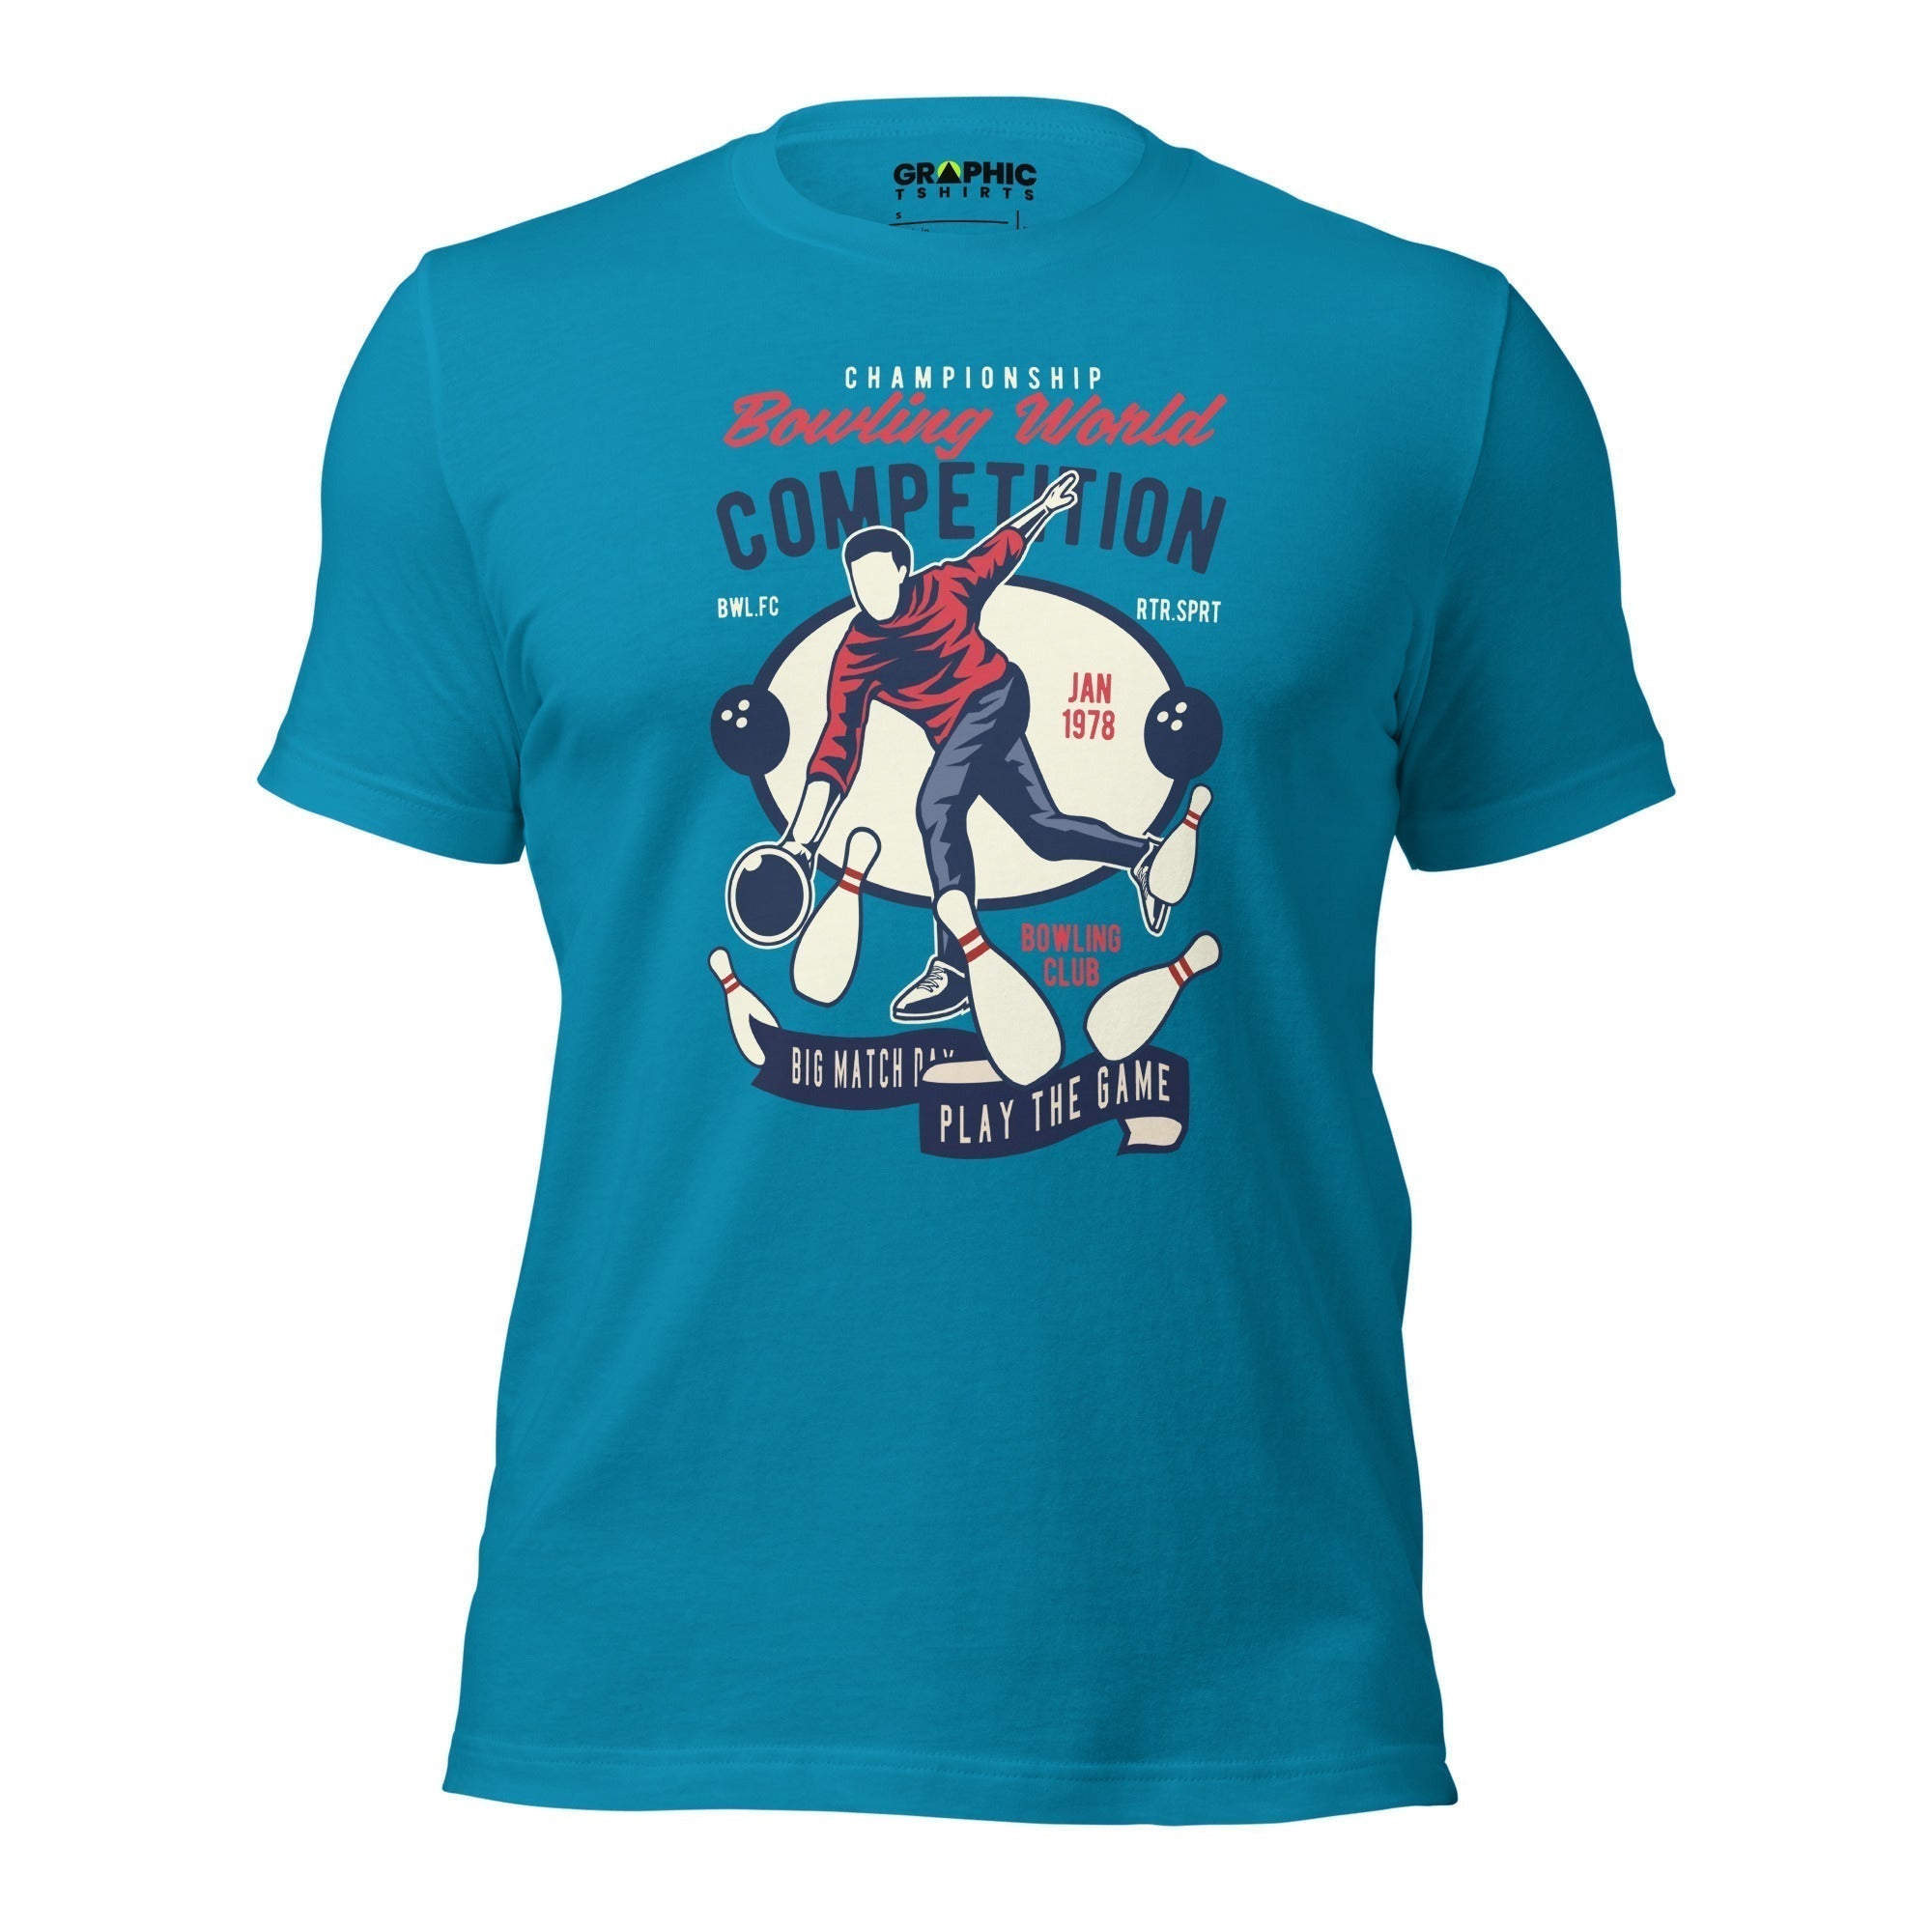 Unisex Staple T-Shirt - Championship Bowling World Competition January 1978 Bowling Club Big Match Day Play The Game - GRAPHIC T-SHIRTS